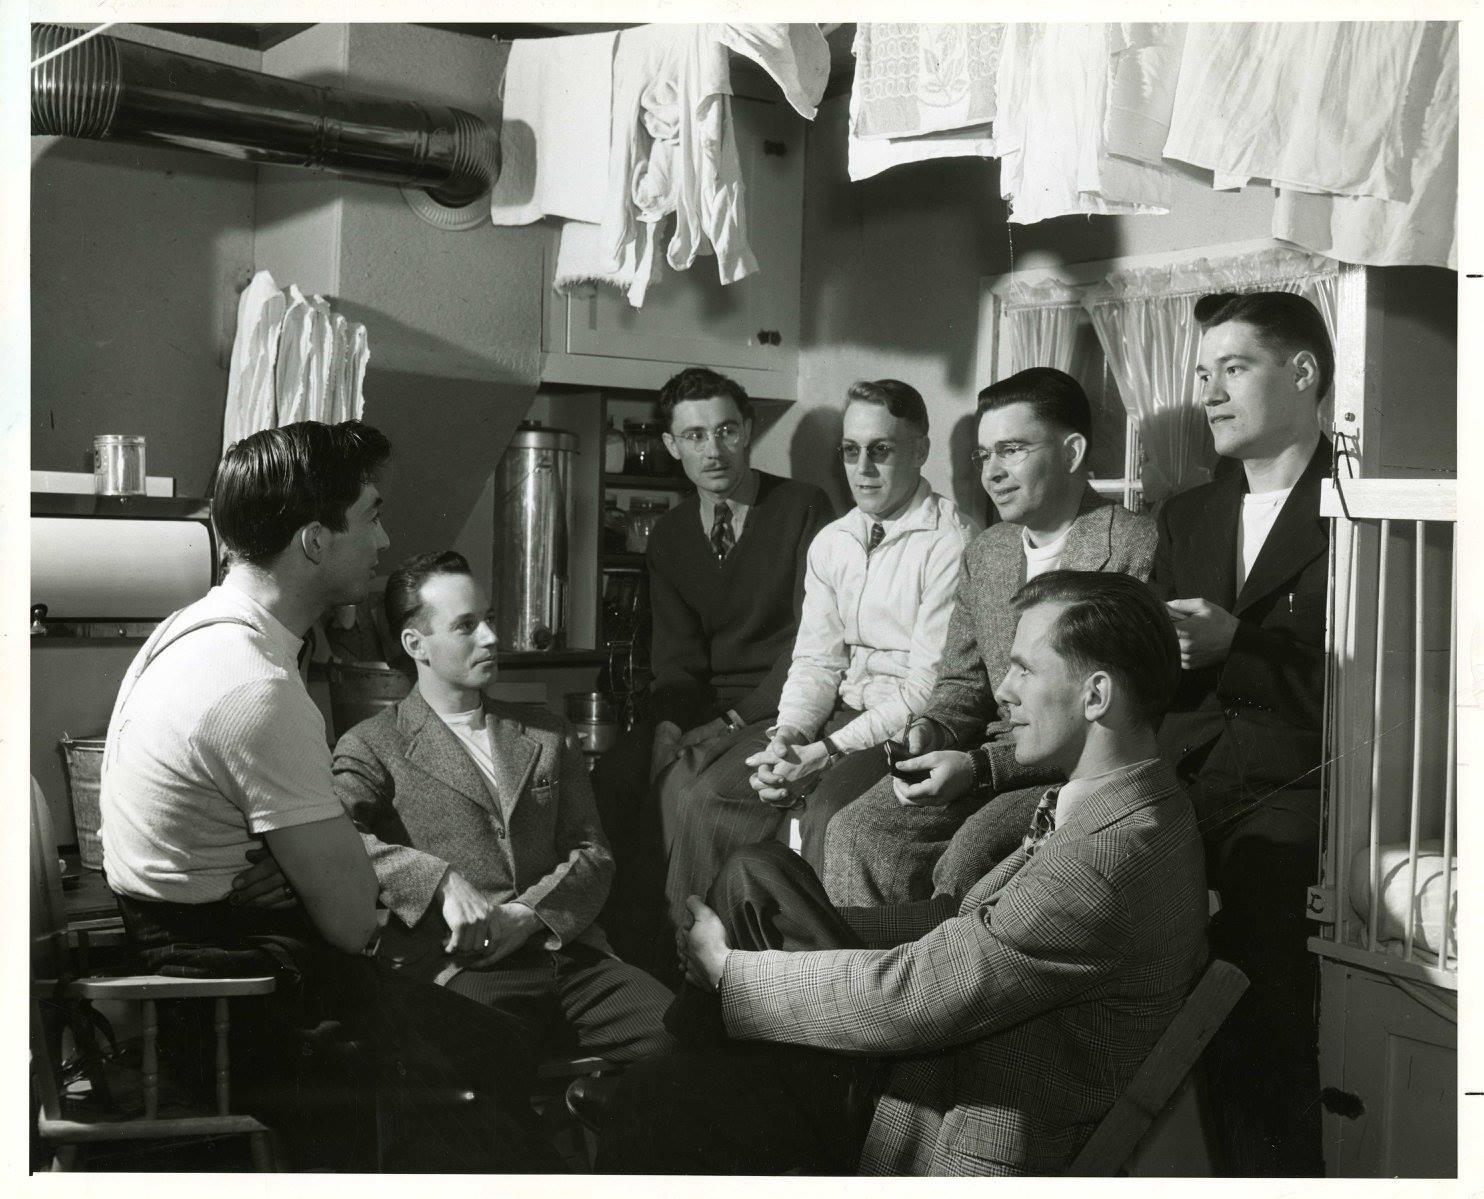 A photograph of seven men inside the kitchen of a home in Veterans' Village at the University of Manitoba Campus. Most, if not all, of the men are likely students. House is likely the home of the individual on the far left of the image. Photograph is dated as having been taken around 1948 by the National Film Board of Canada.<br />
Source: University Relations & Information Office fonds